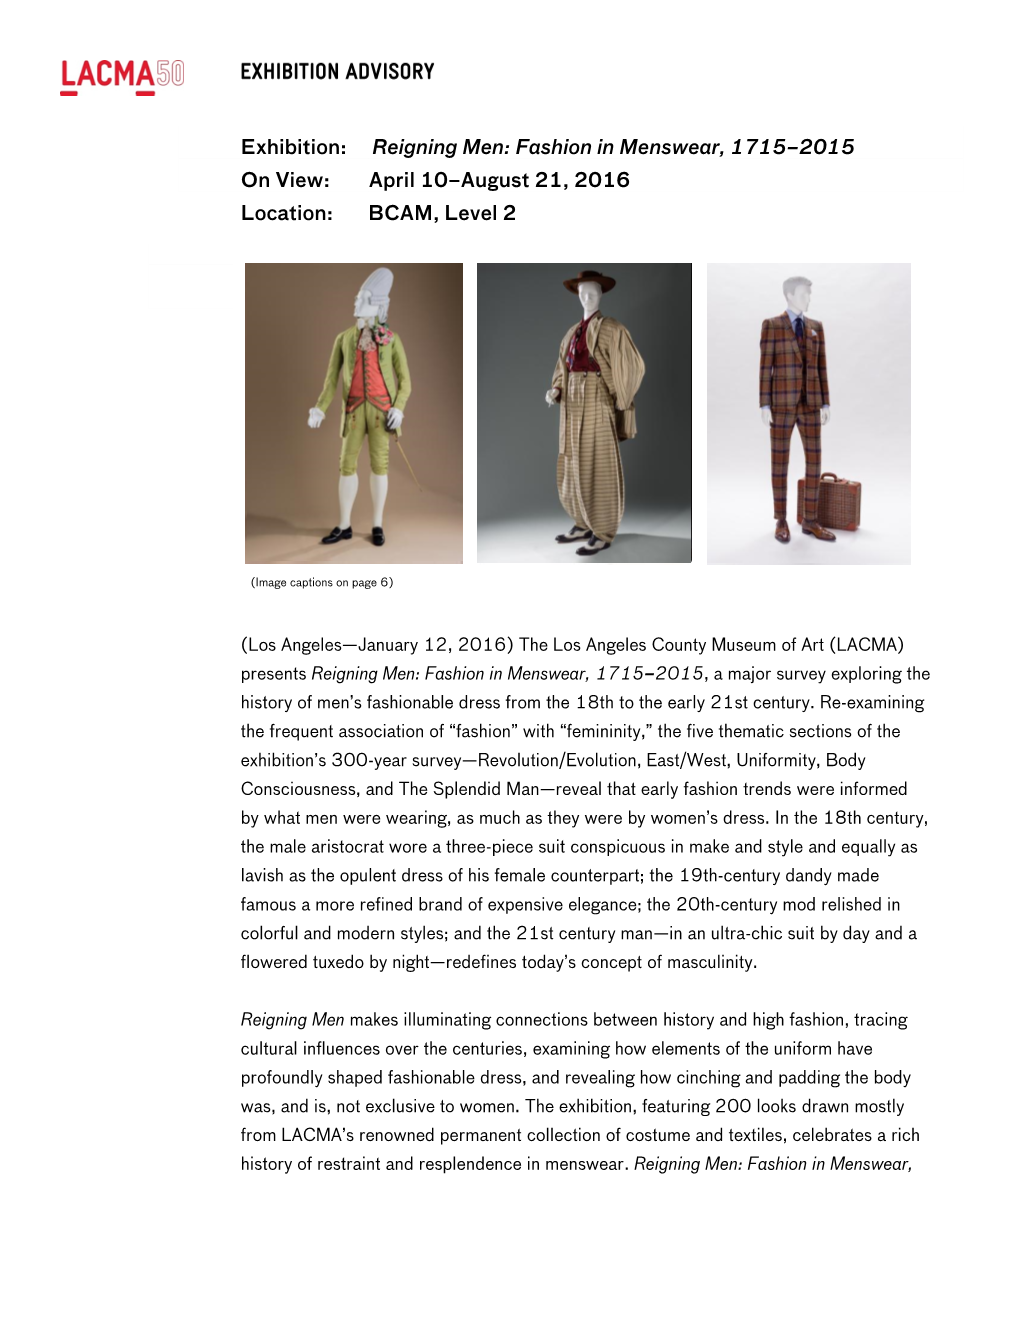 Exhibition: Reigning Men: Fashion in Menswear, 1715–2015 on View: April 10–August 21, 2016 Location: BCAM, Level 2